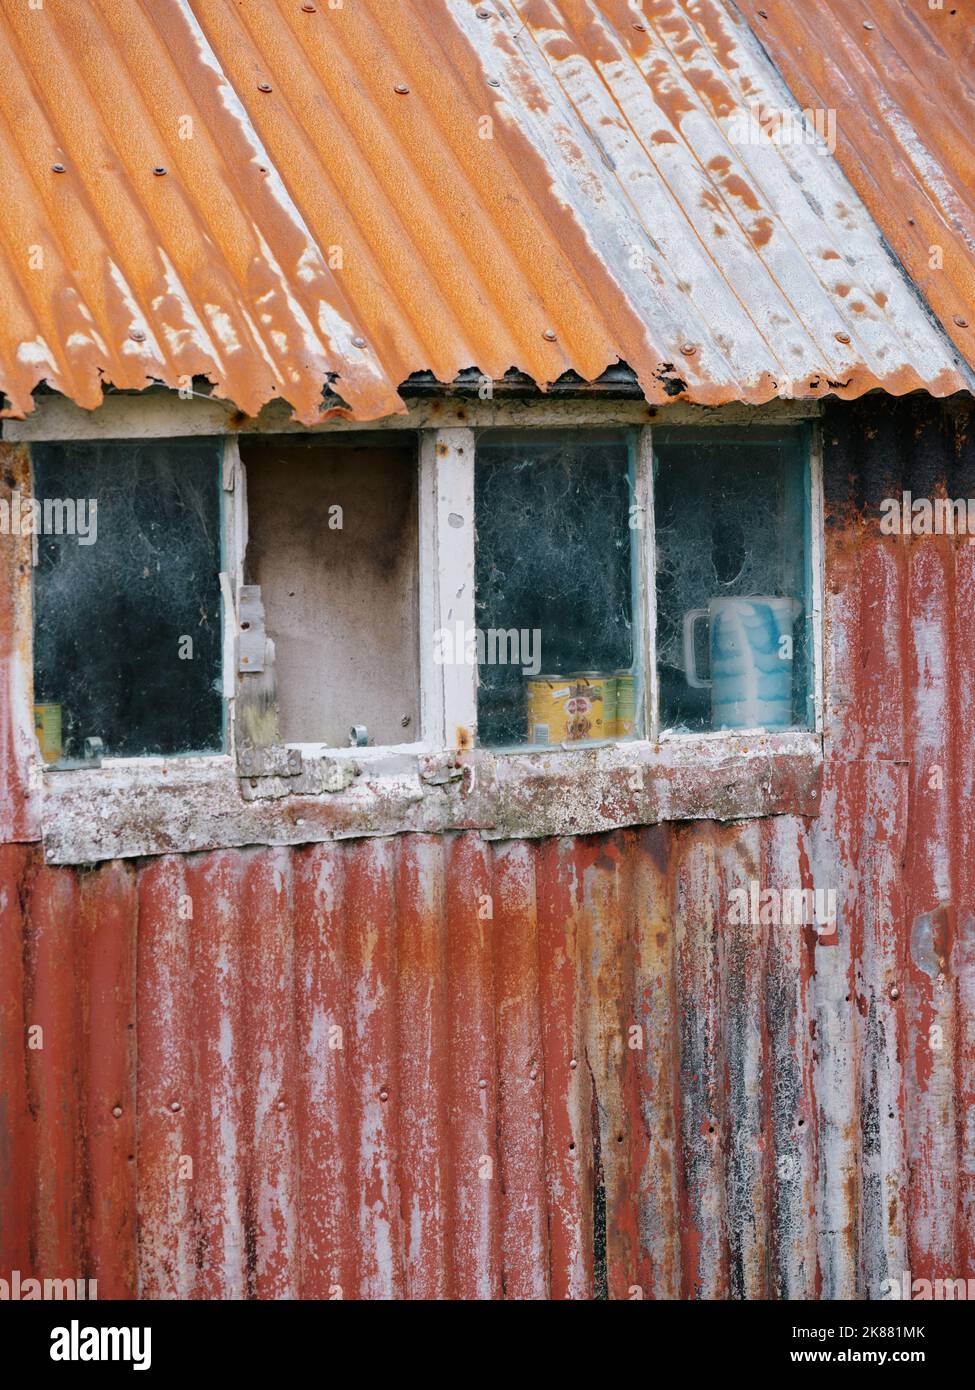 Dilapidated old painted tin shed with windows detail background. Stock Photo